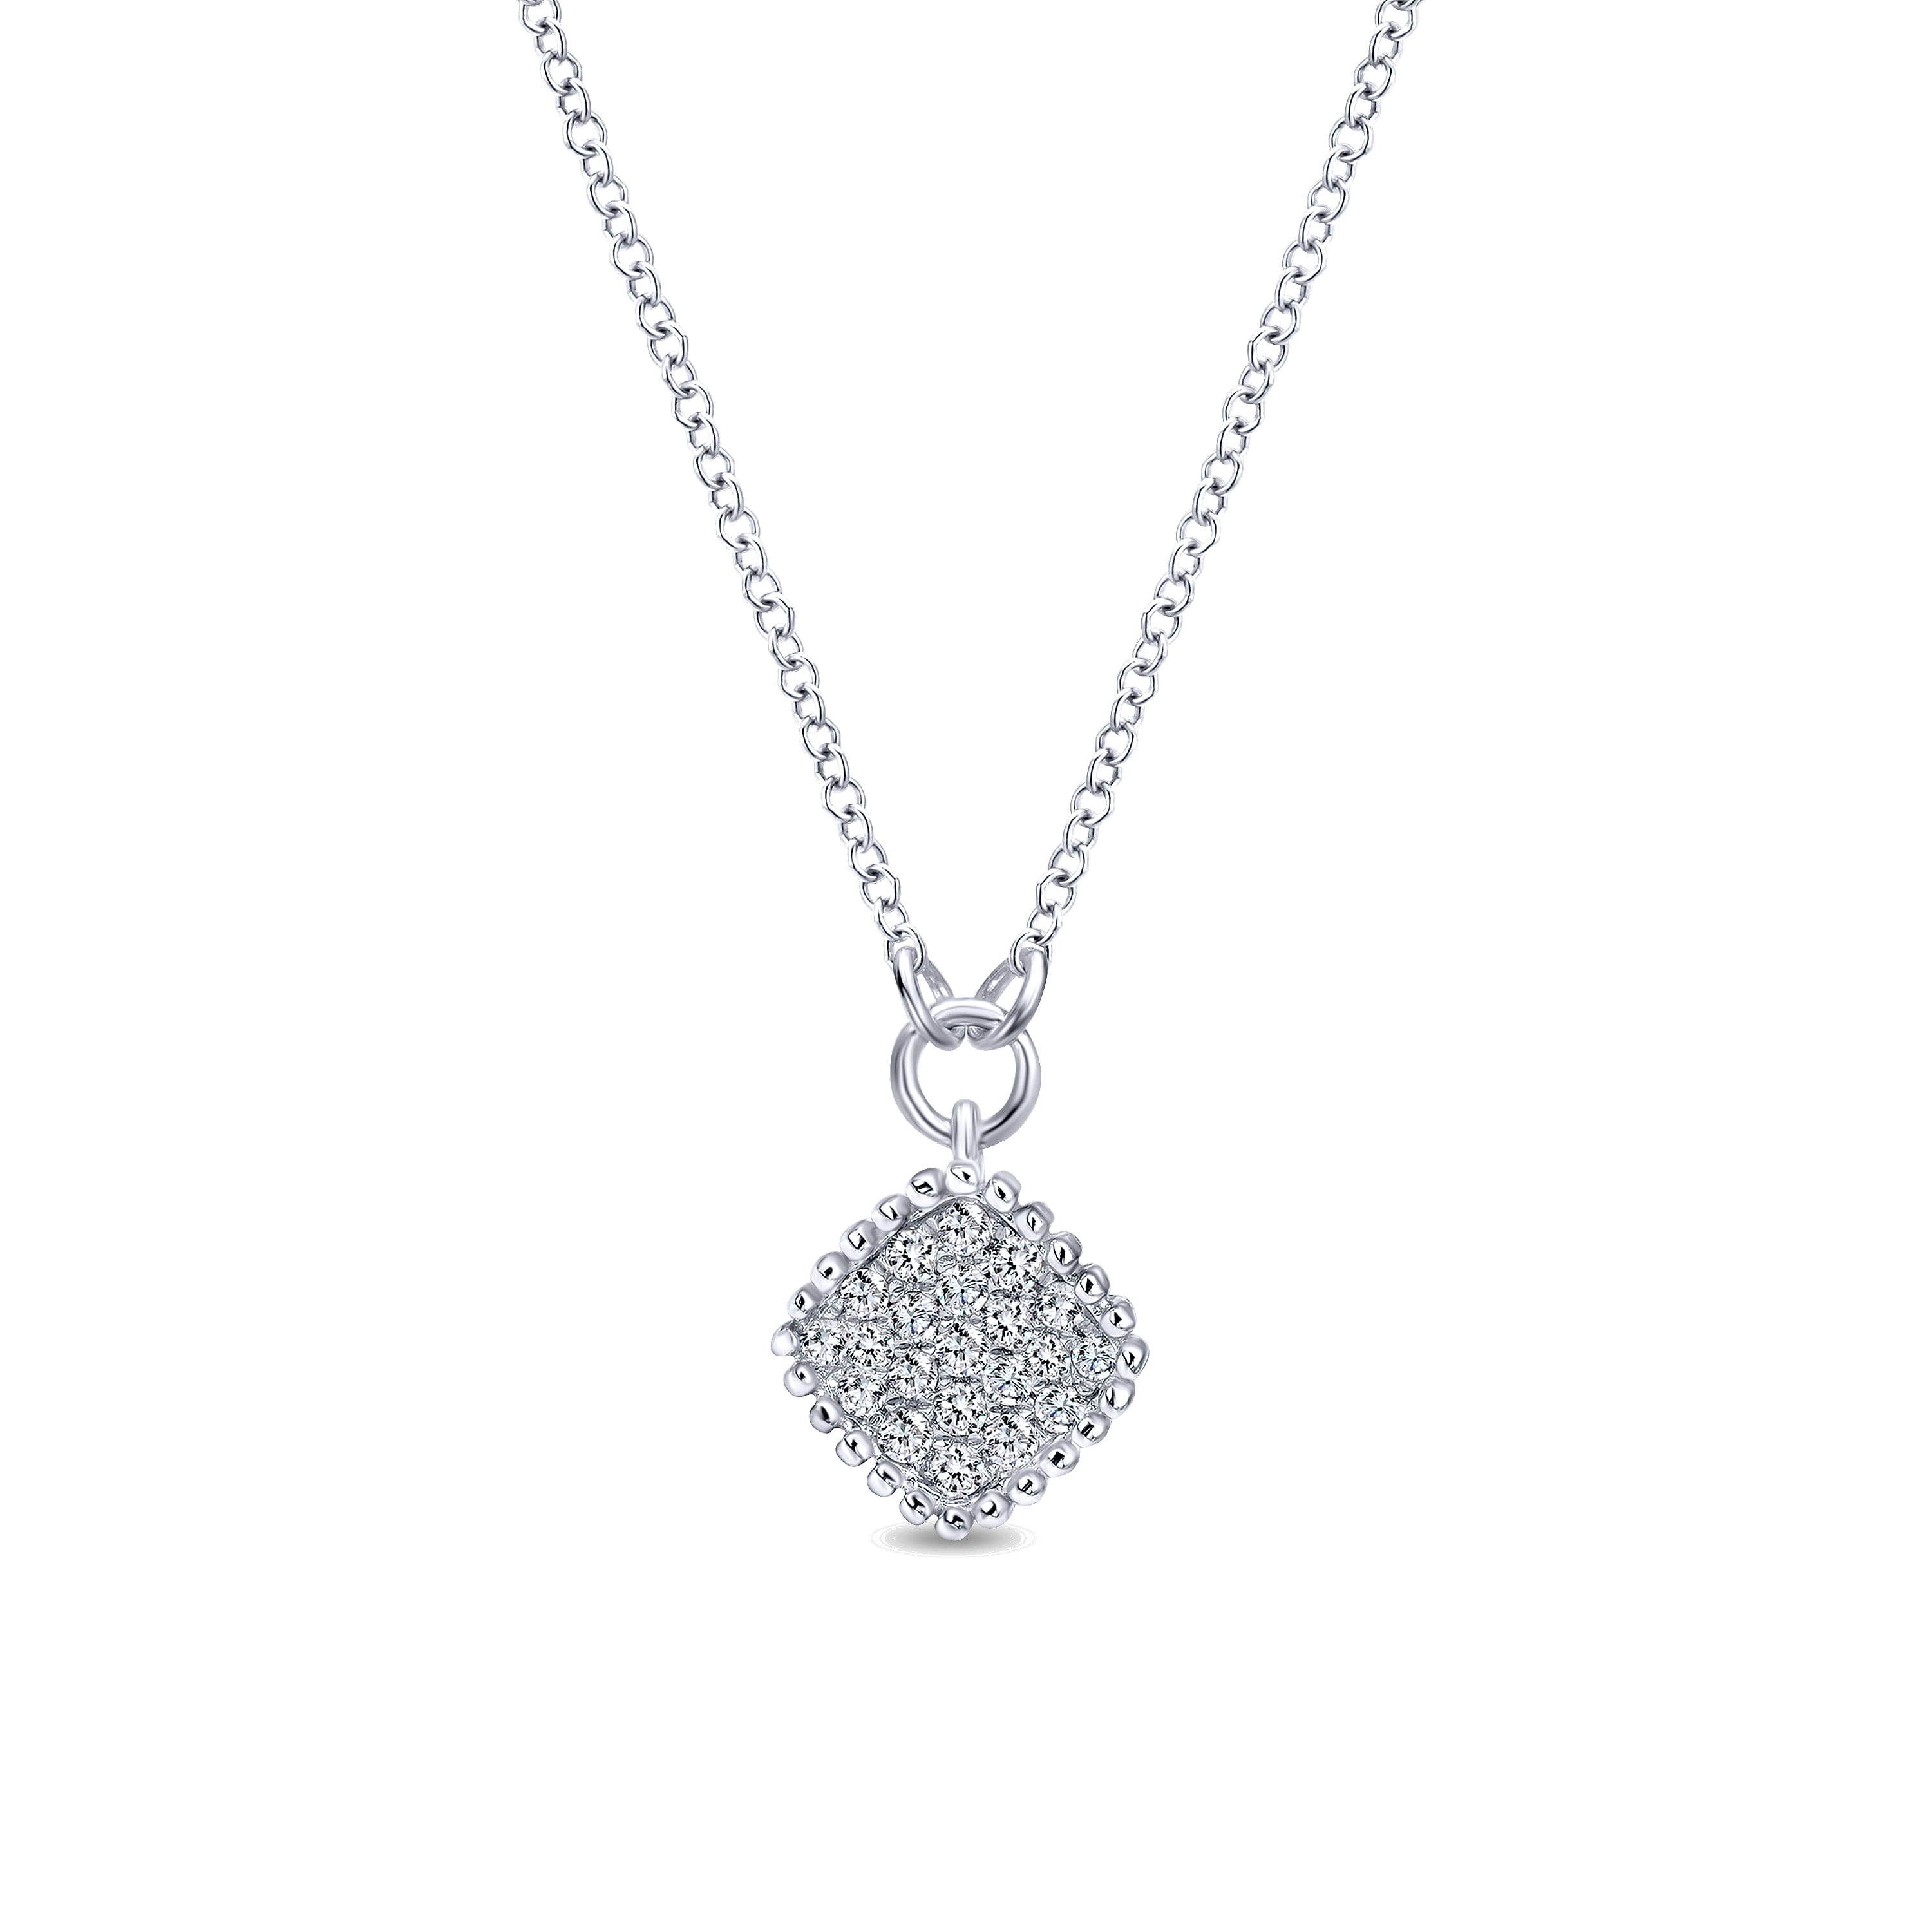 18 inch 14K White Gold Beaded Cushion Shaped Diamond Cluster Pendant Necklace